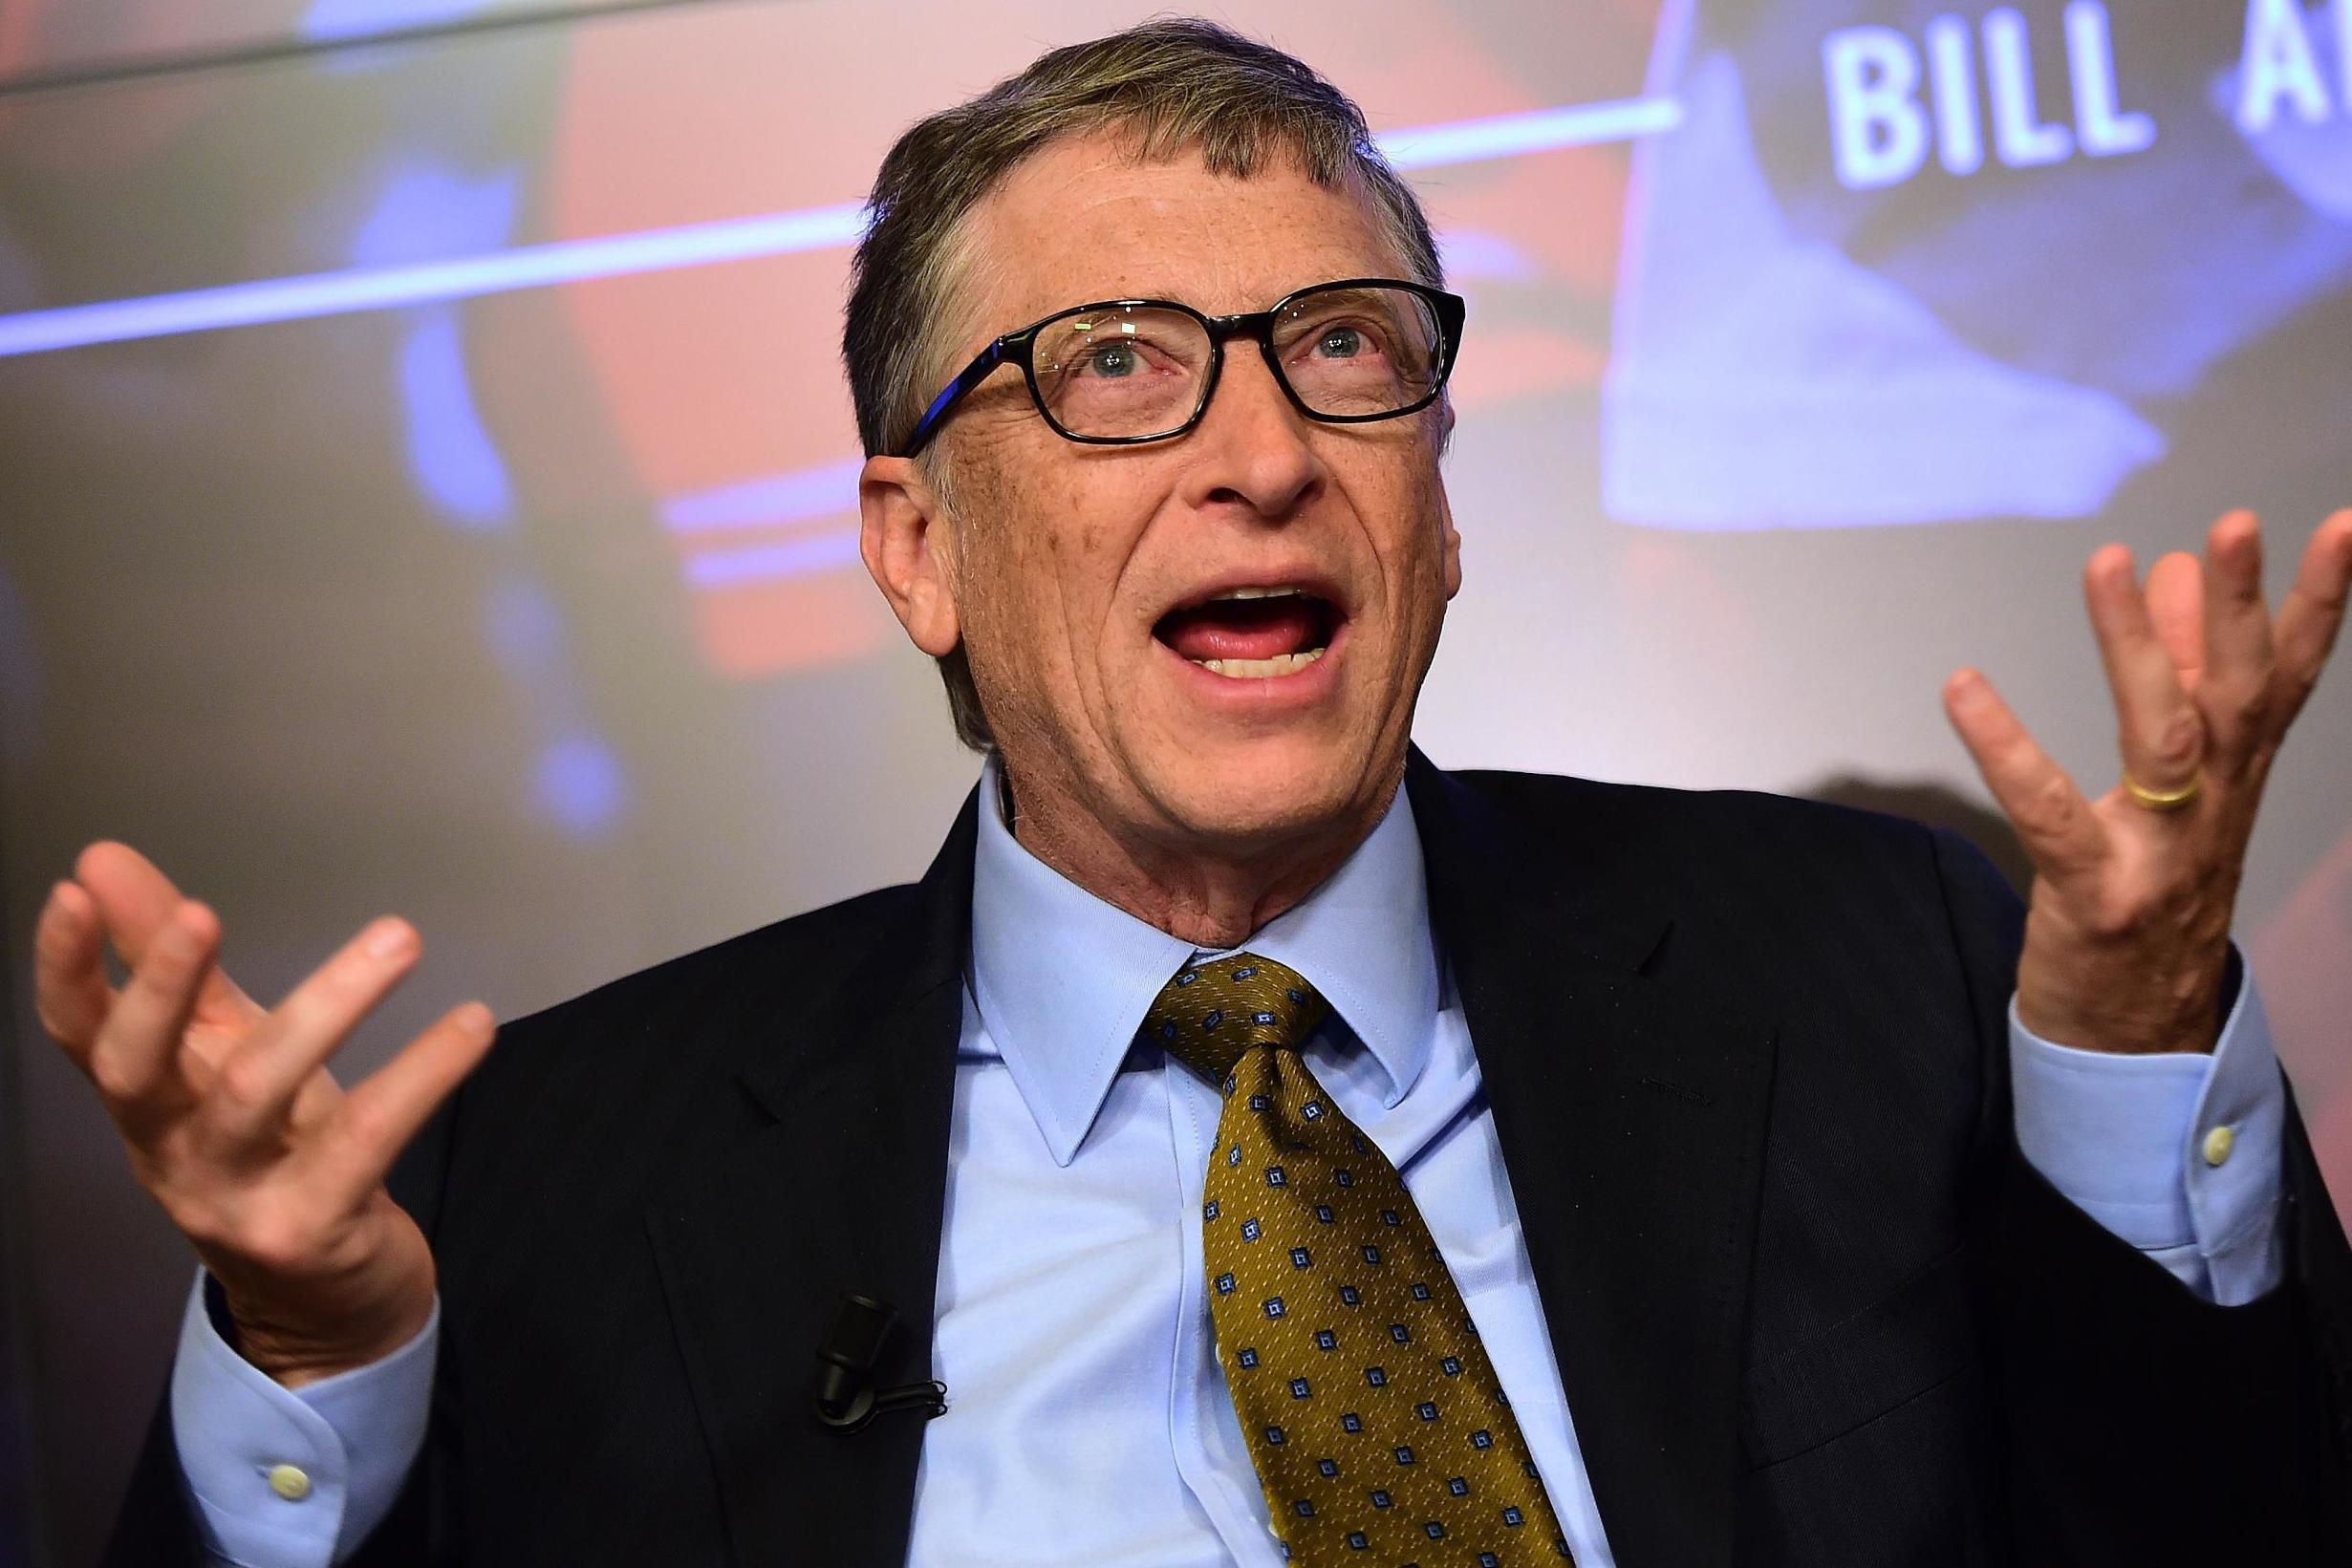 Bill Gates relied on three tactics for streamlining his email inbox (Getty)